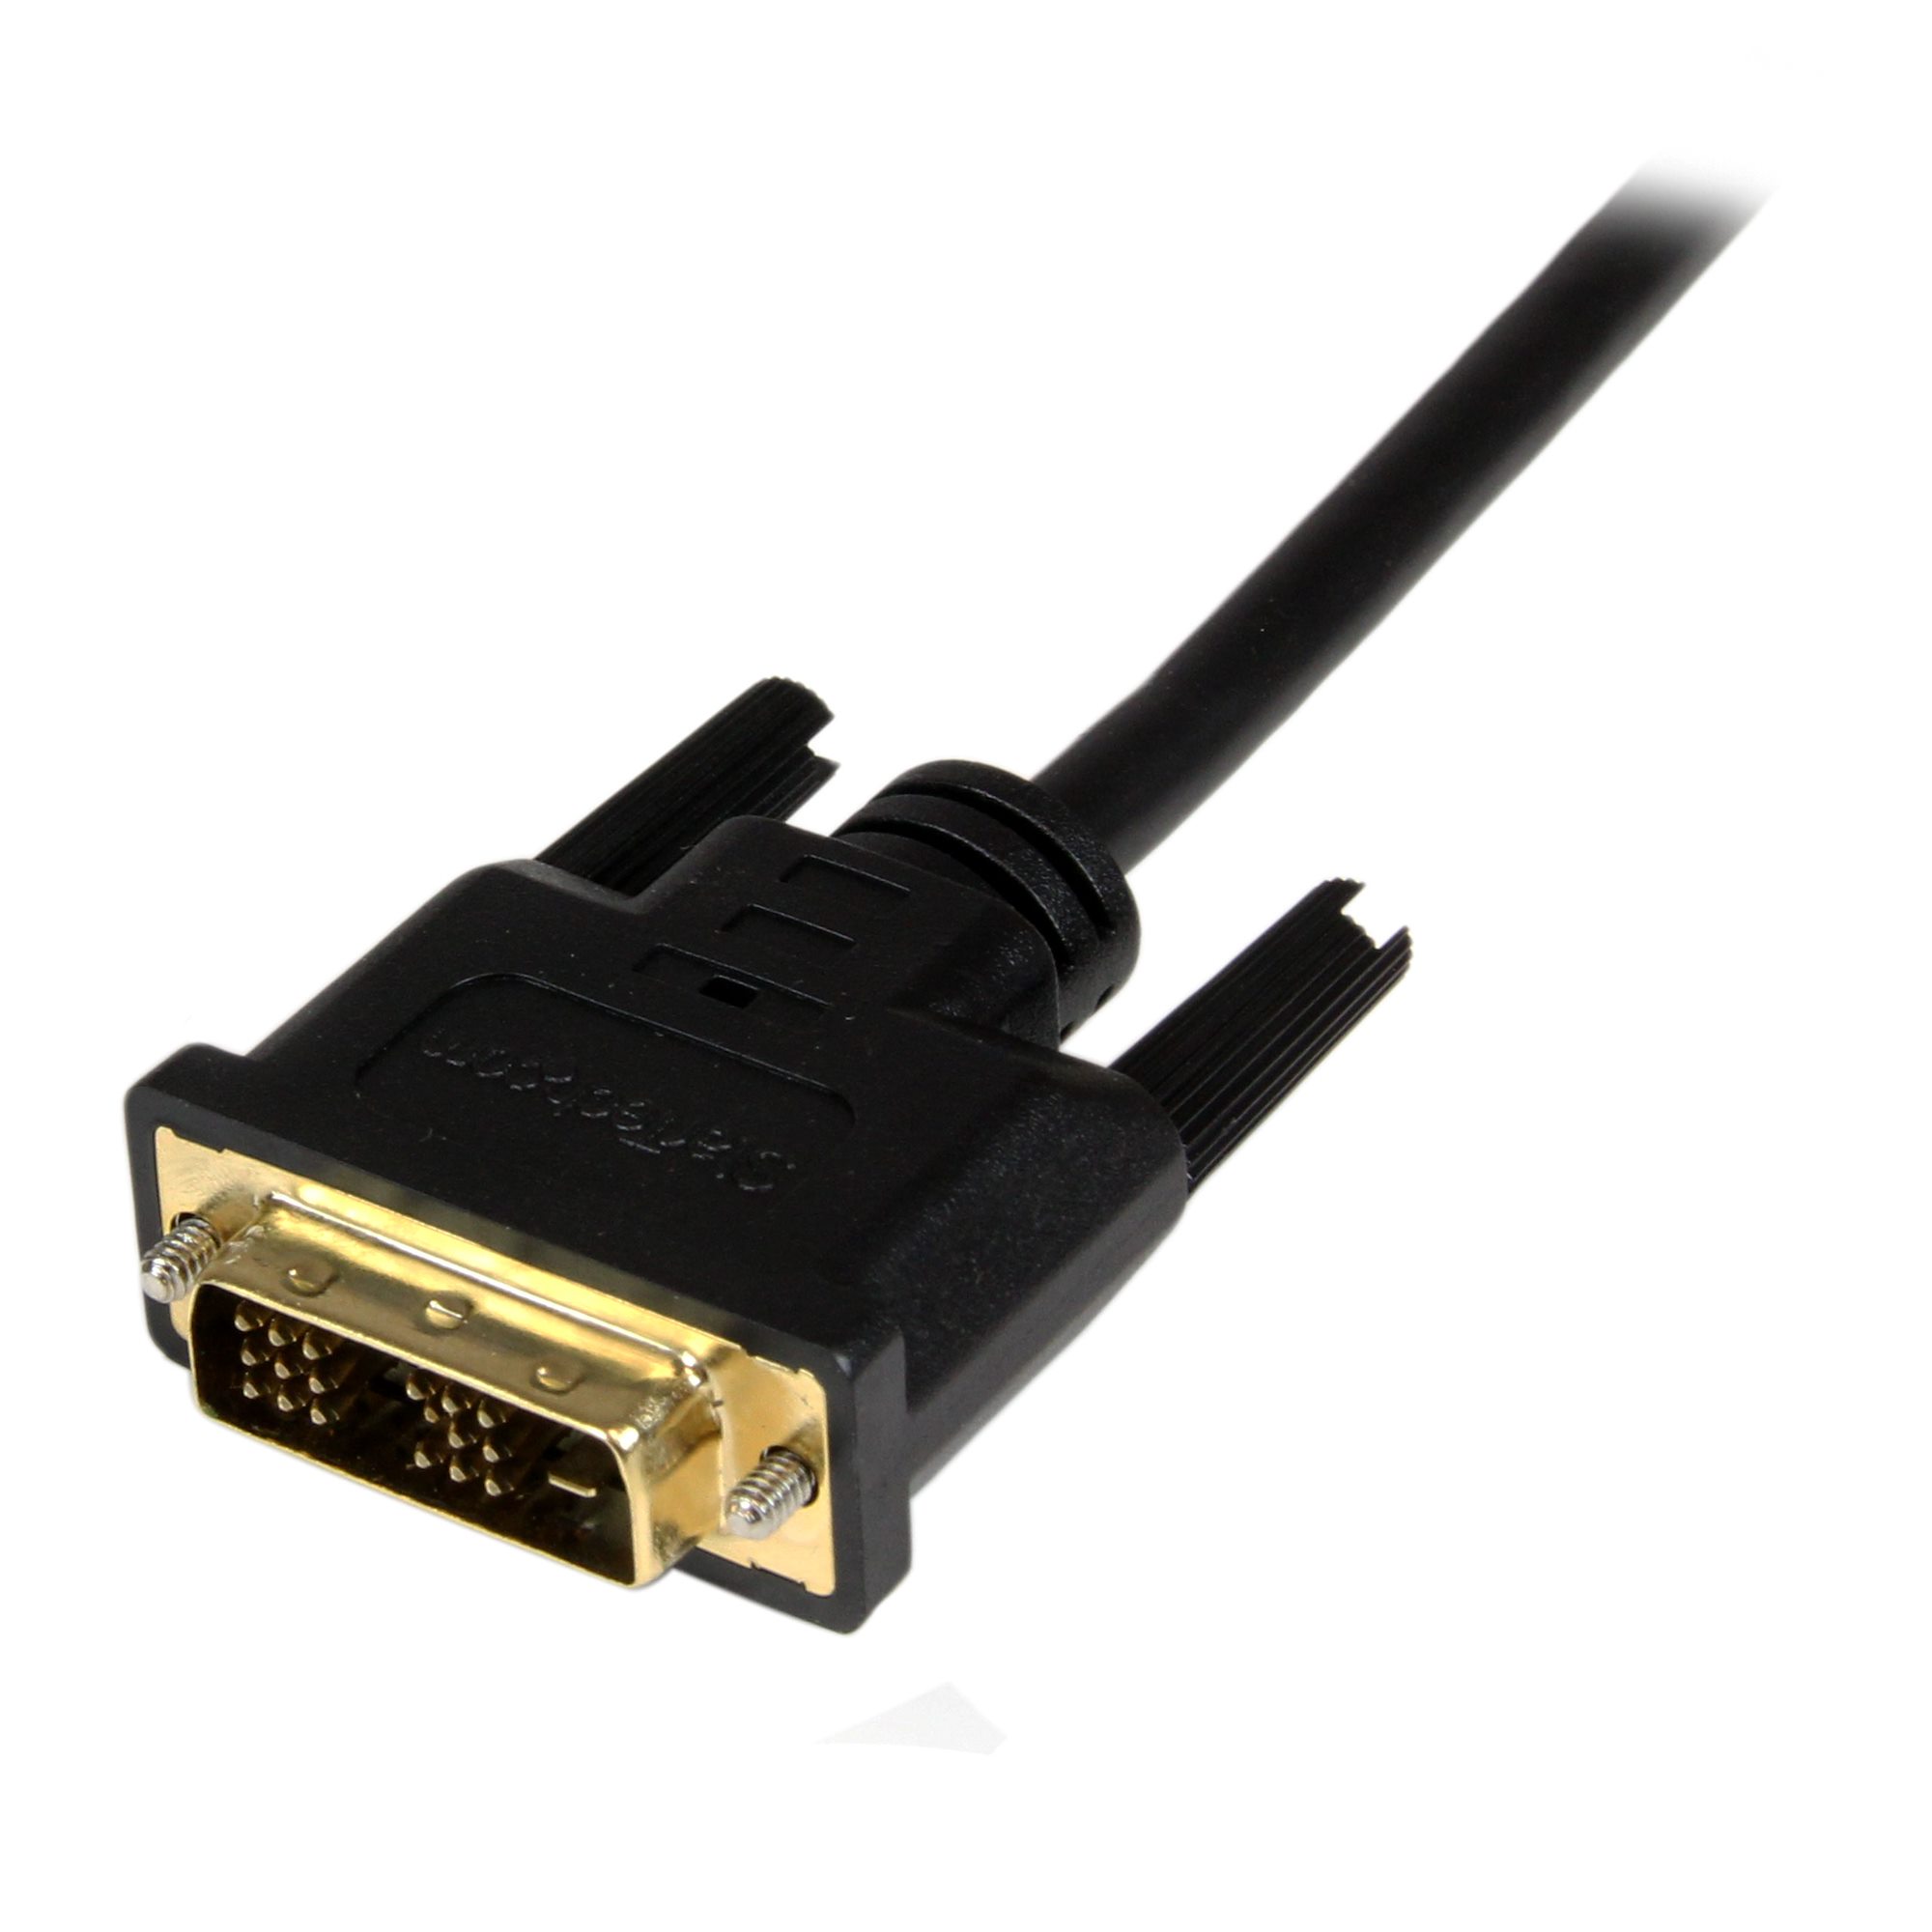 MMOBIEL High Speed DVI to HDMI Adapter Cable Gold Plated Connectors Supports all High Resolutions Monitors 3 ft / 1 m